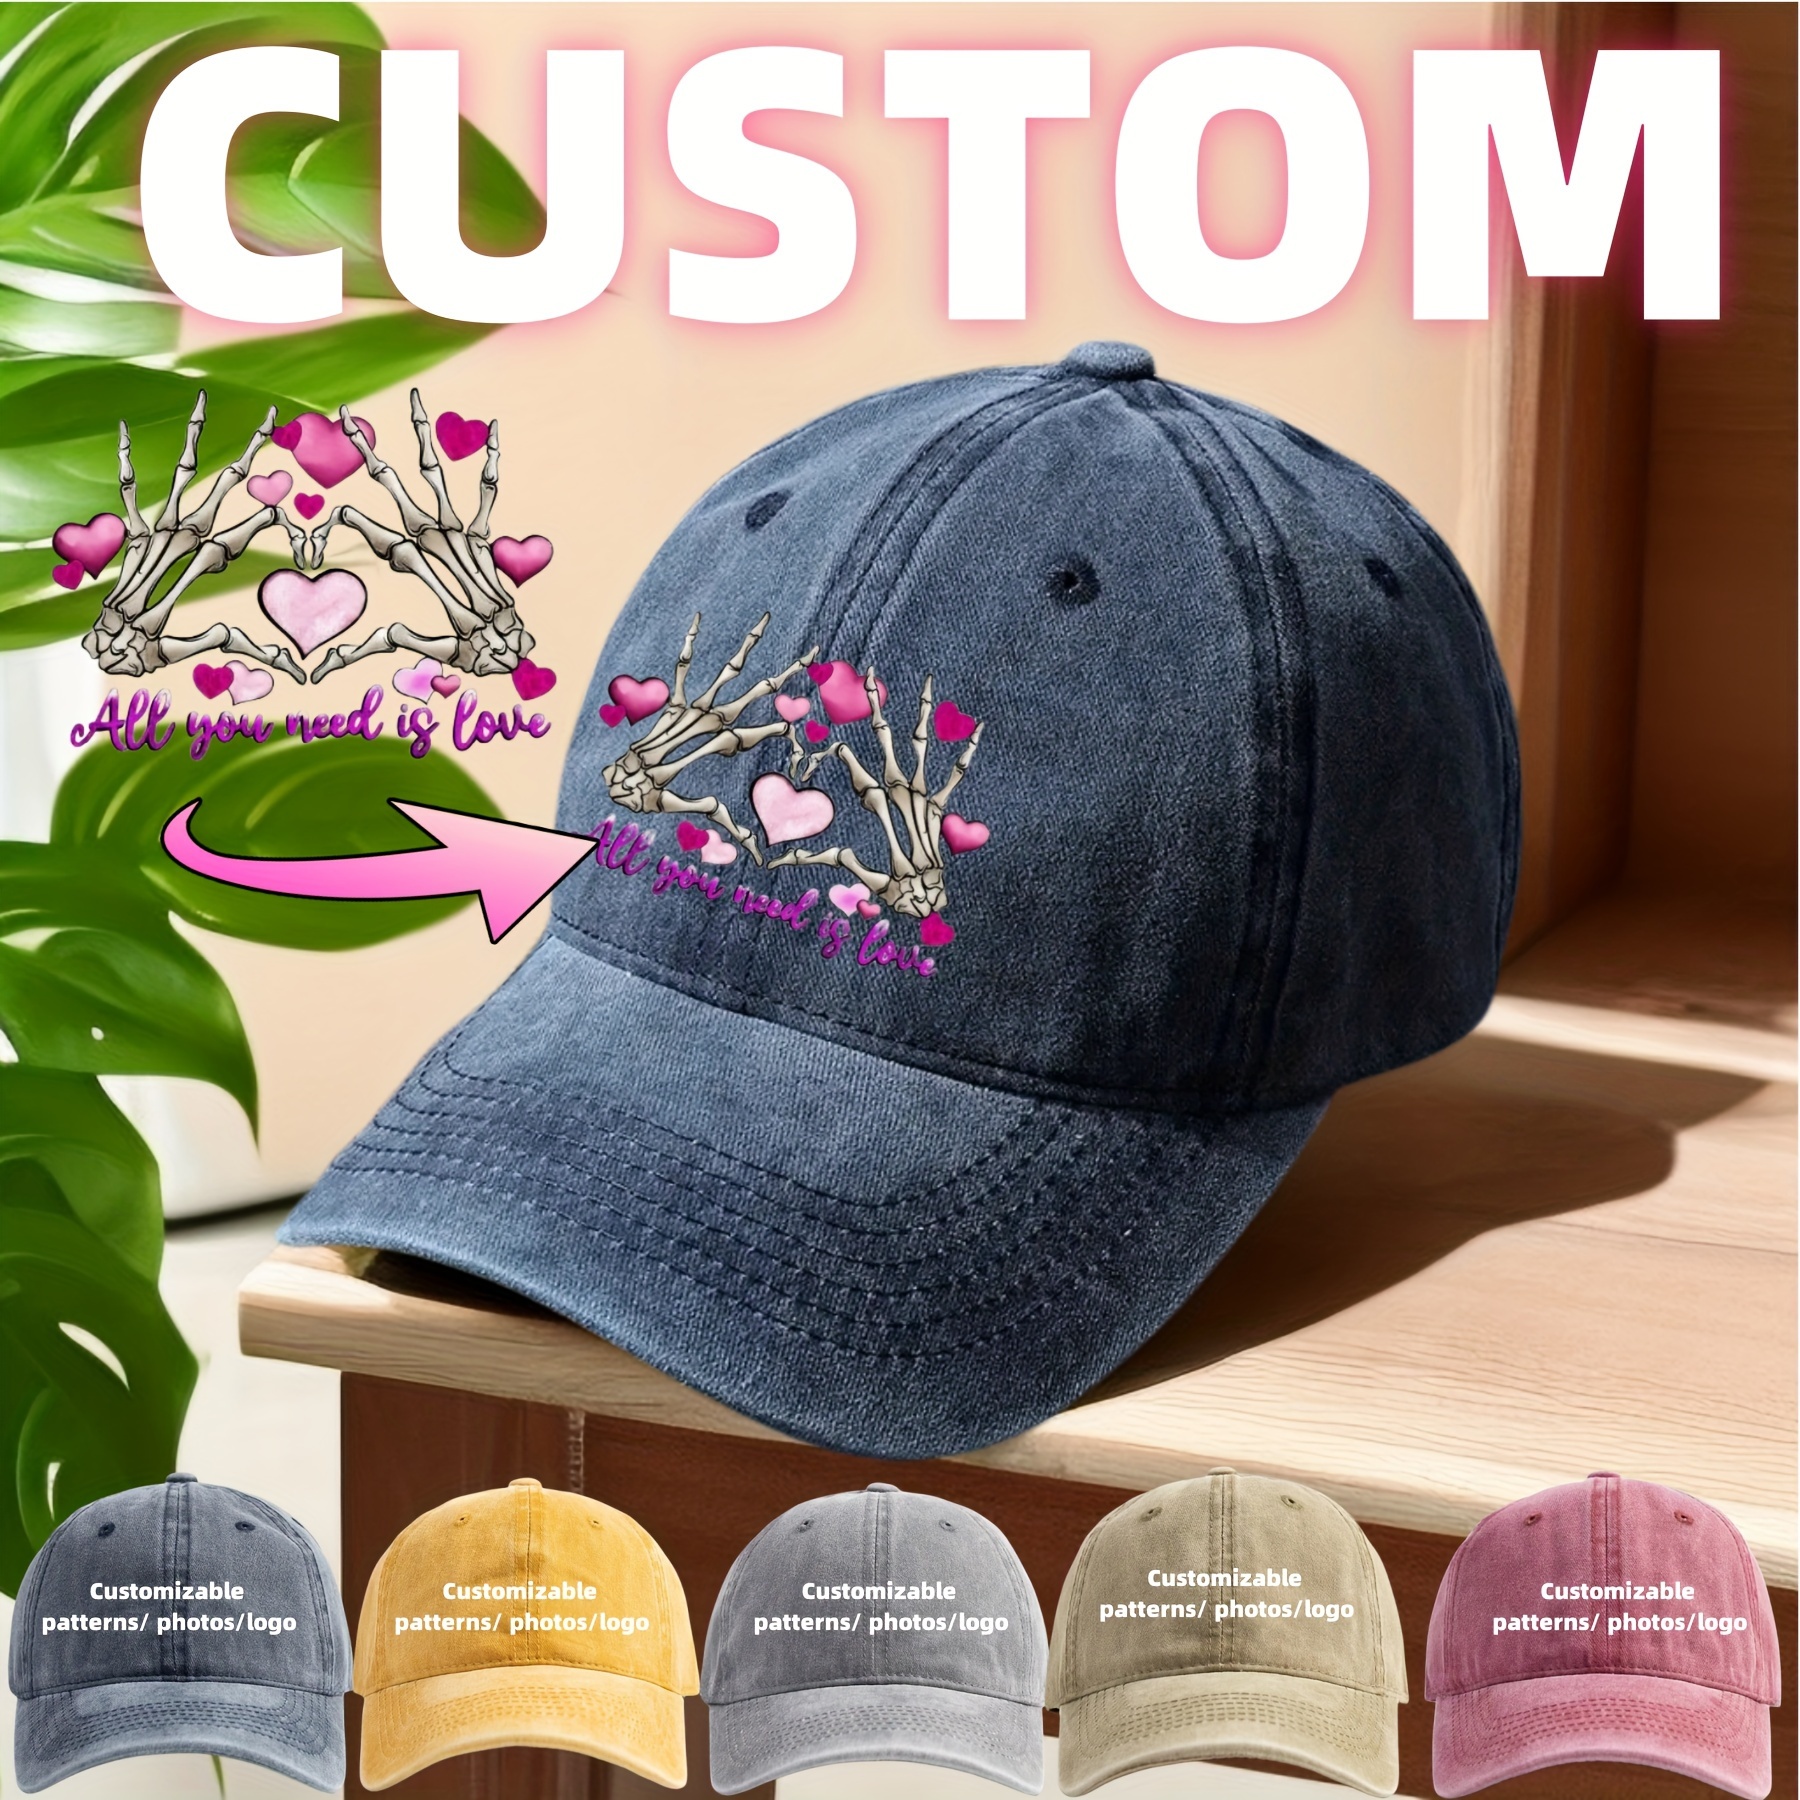 

Customizable Cotton Baseball Cap, Personalized Photo/logo Print, Outdoor Summer Hat, Unisex, Adjustable, Multiple Colors Available